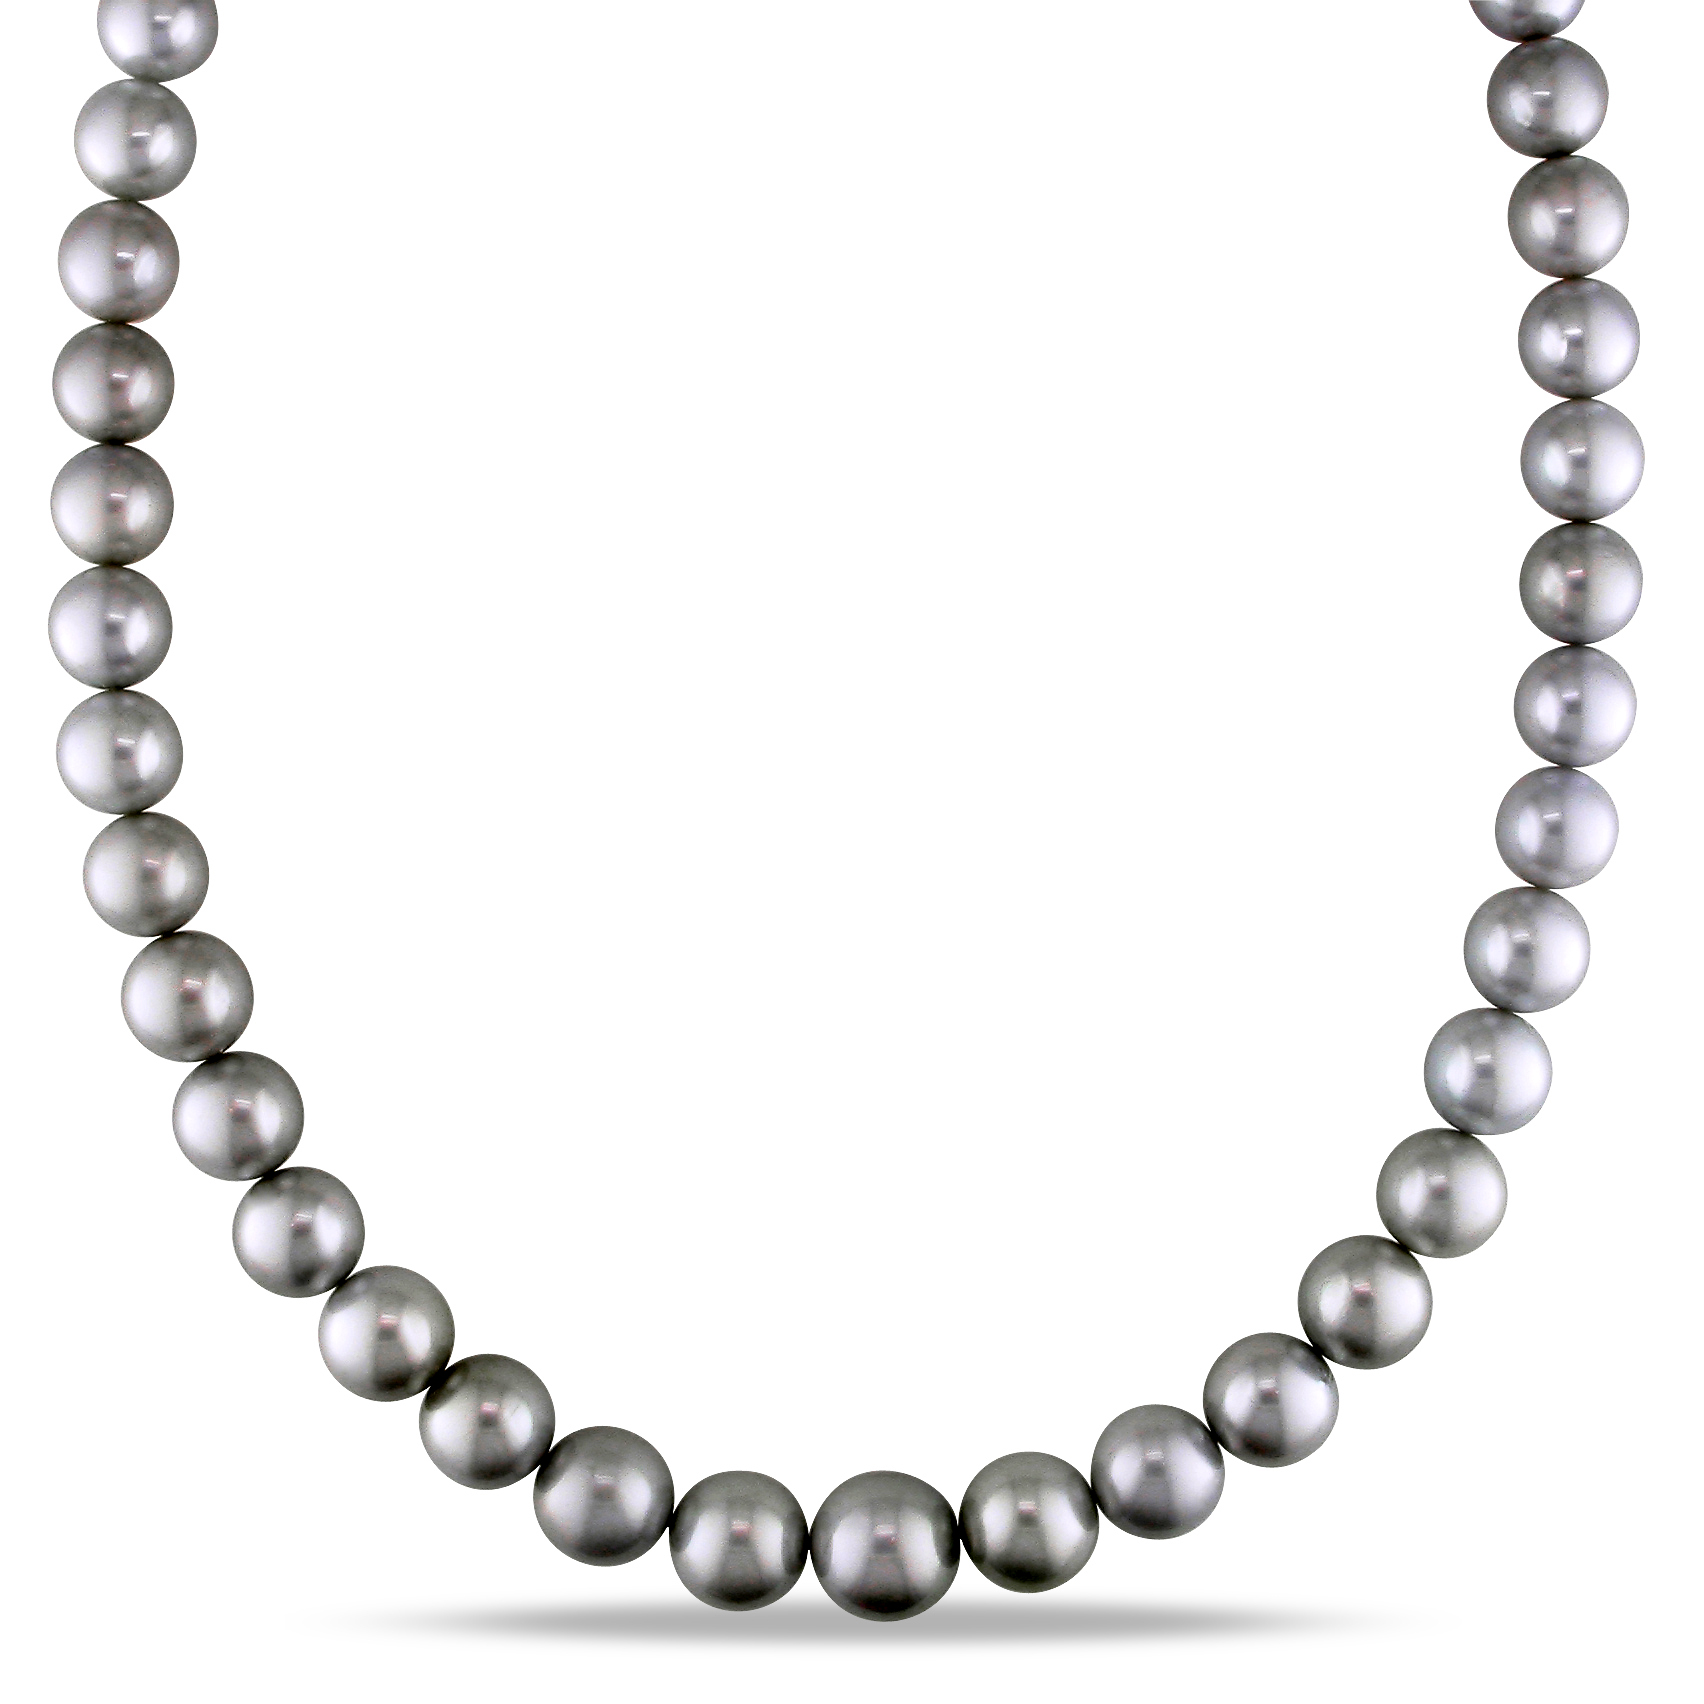 9 - 12.5 MM Silver Tahitian Cultured Pearl Strand with 14k White Gold Ball Clasp - 18 in